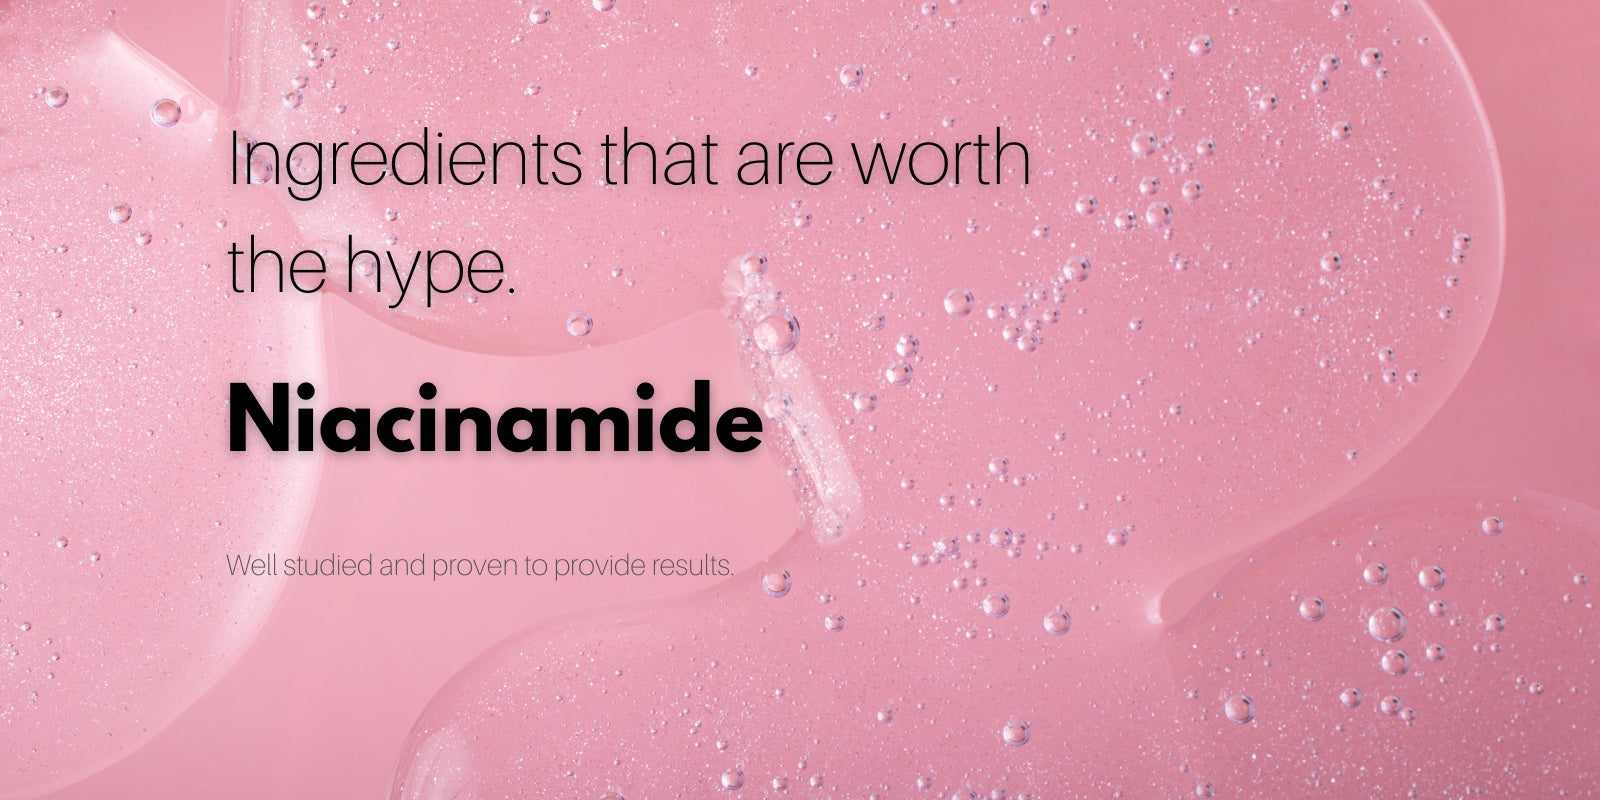 Niacinamide a skincare hero ingredient worth the hype. Victoria BC Vancouver BC